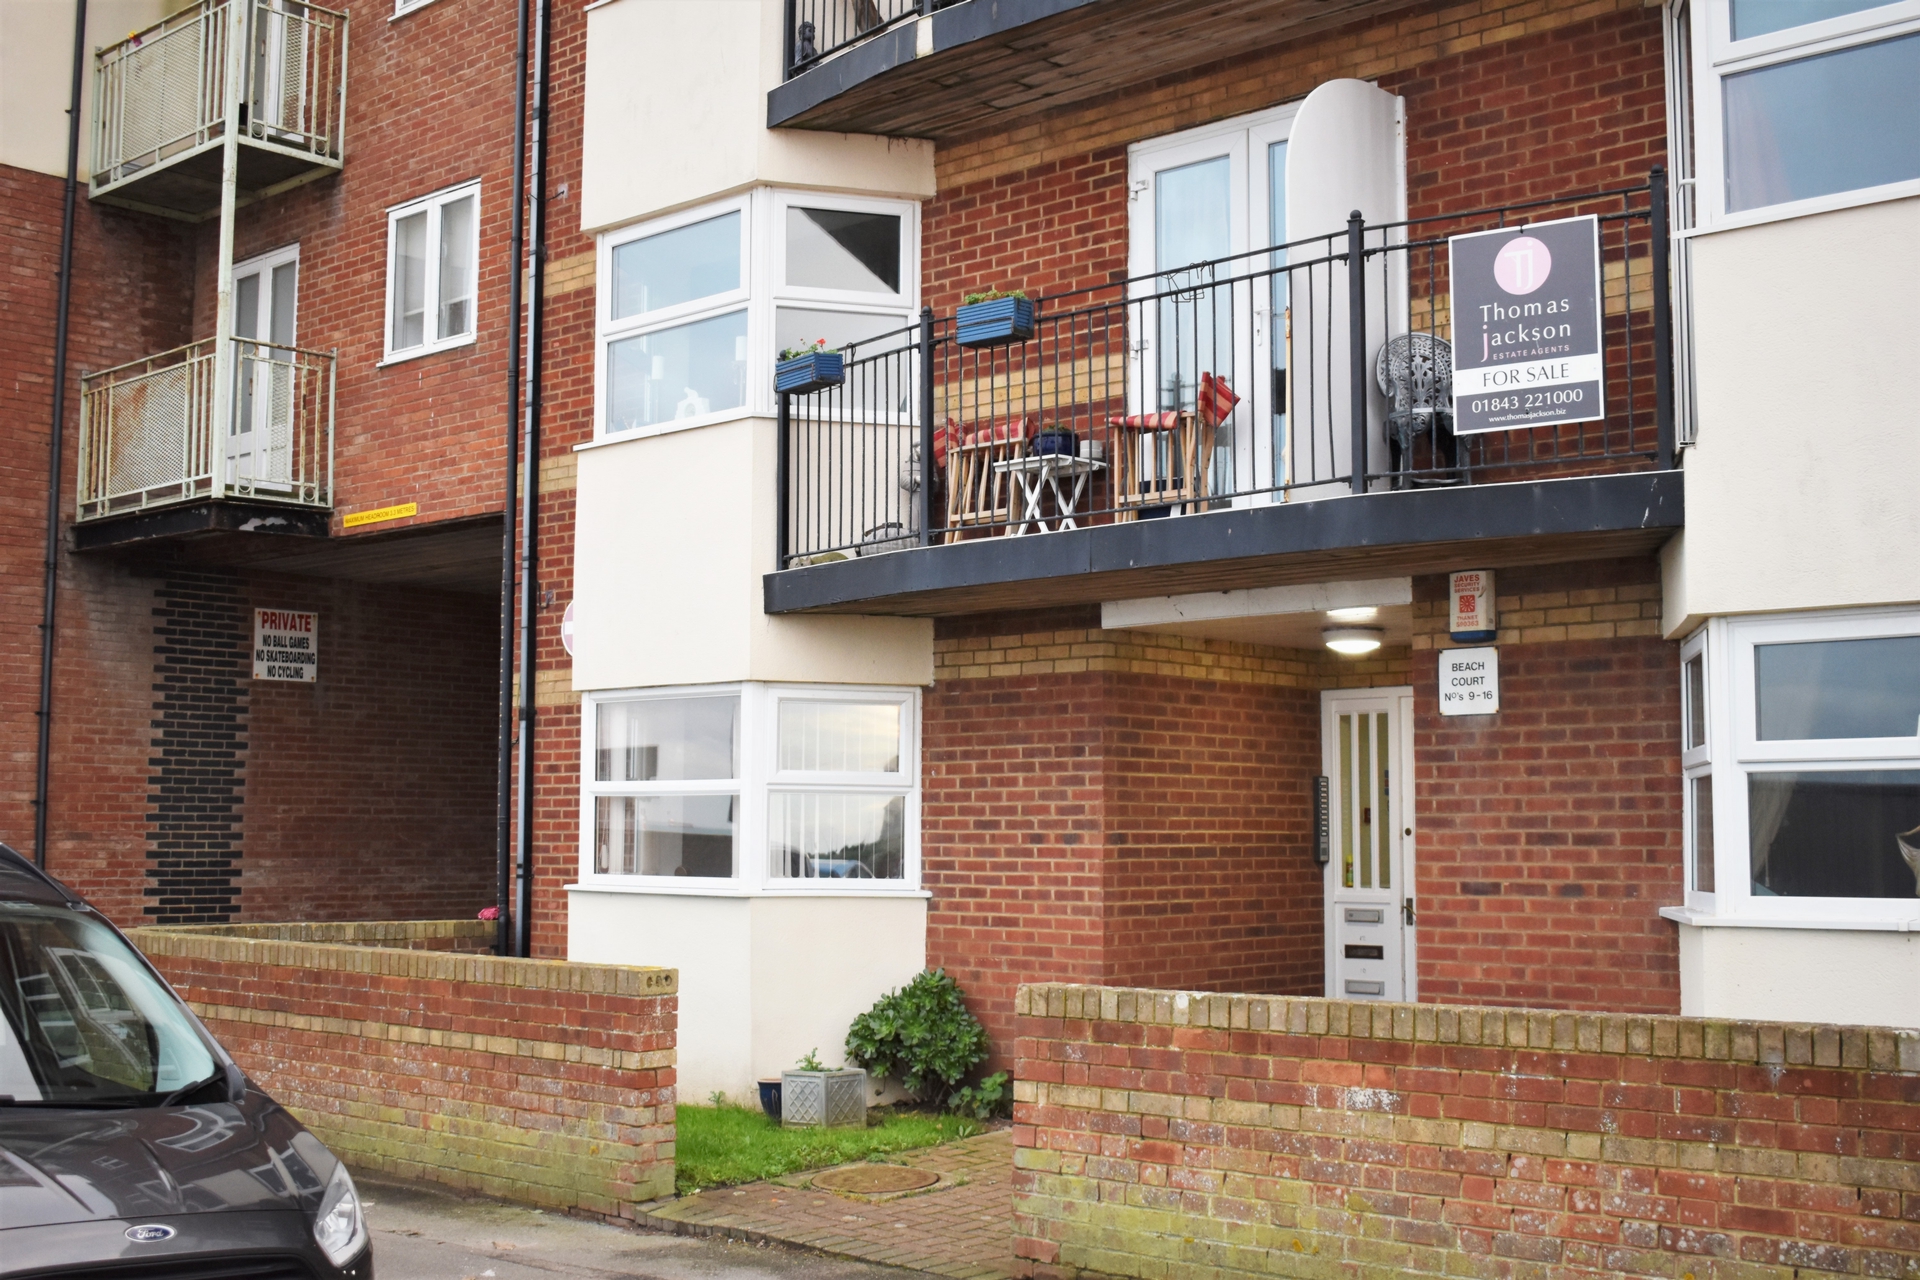 Perfectly located two bedroomed ground floor apartment overlooking westbrook beach. 